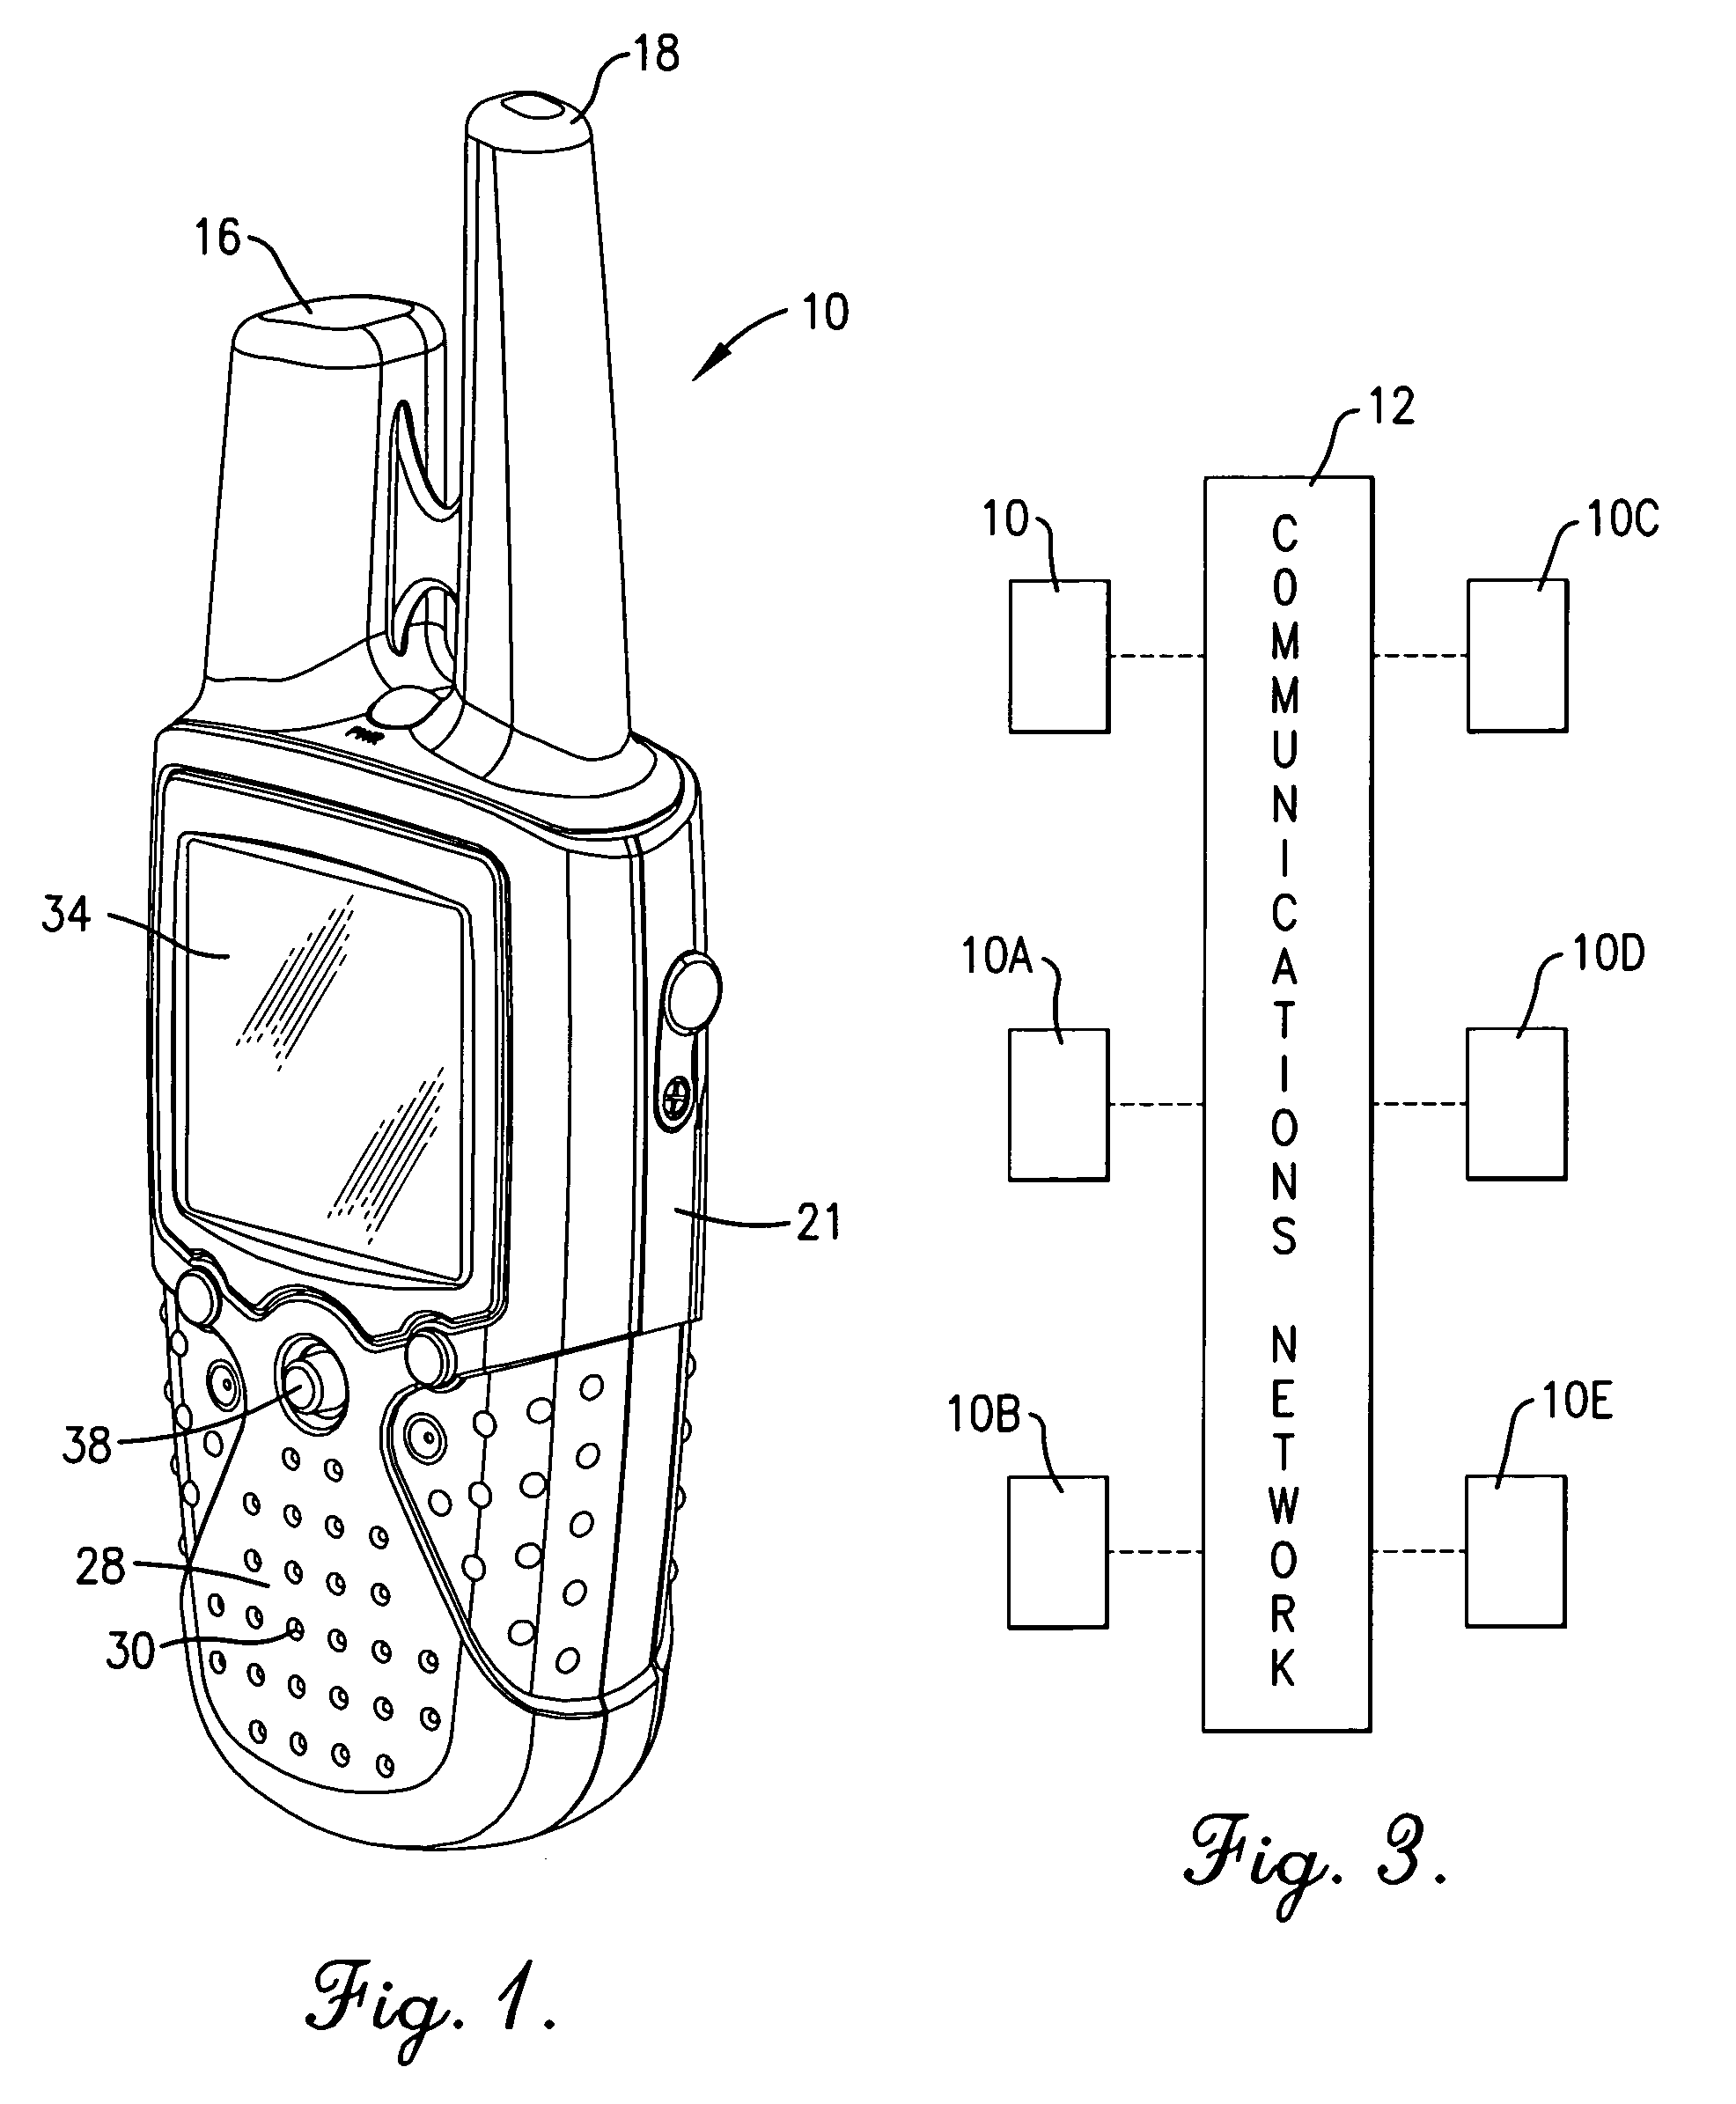 Combined global positioning system receiver and radio